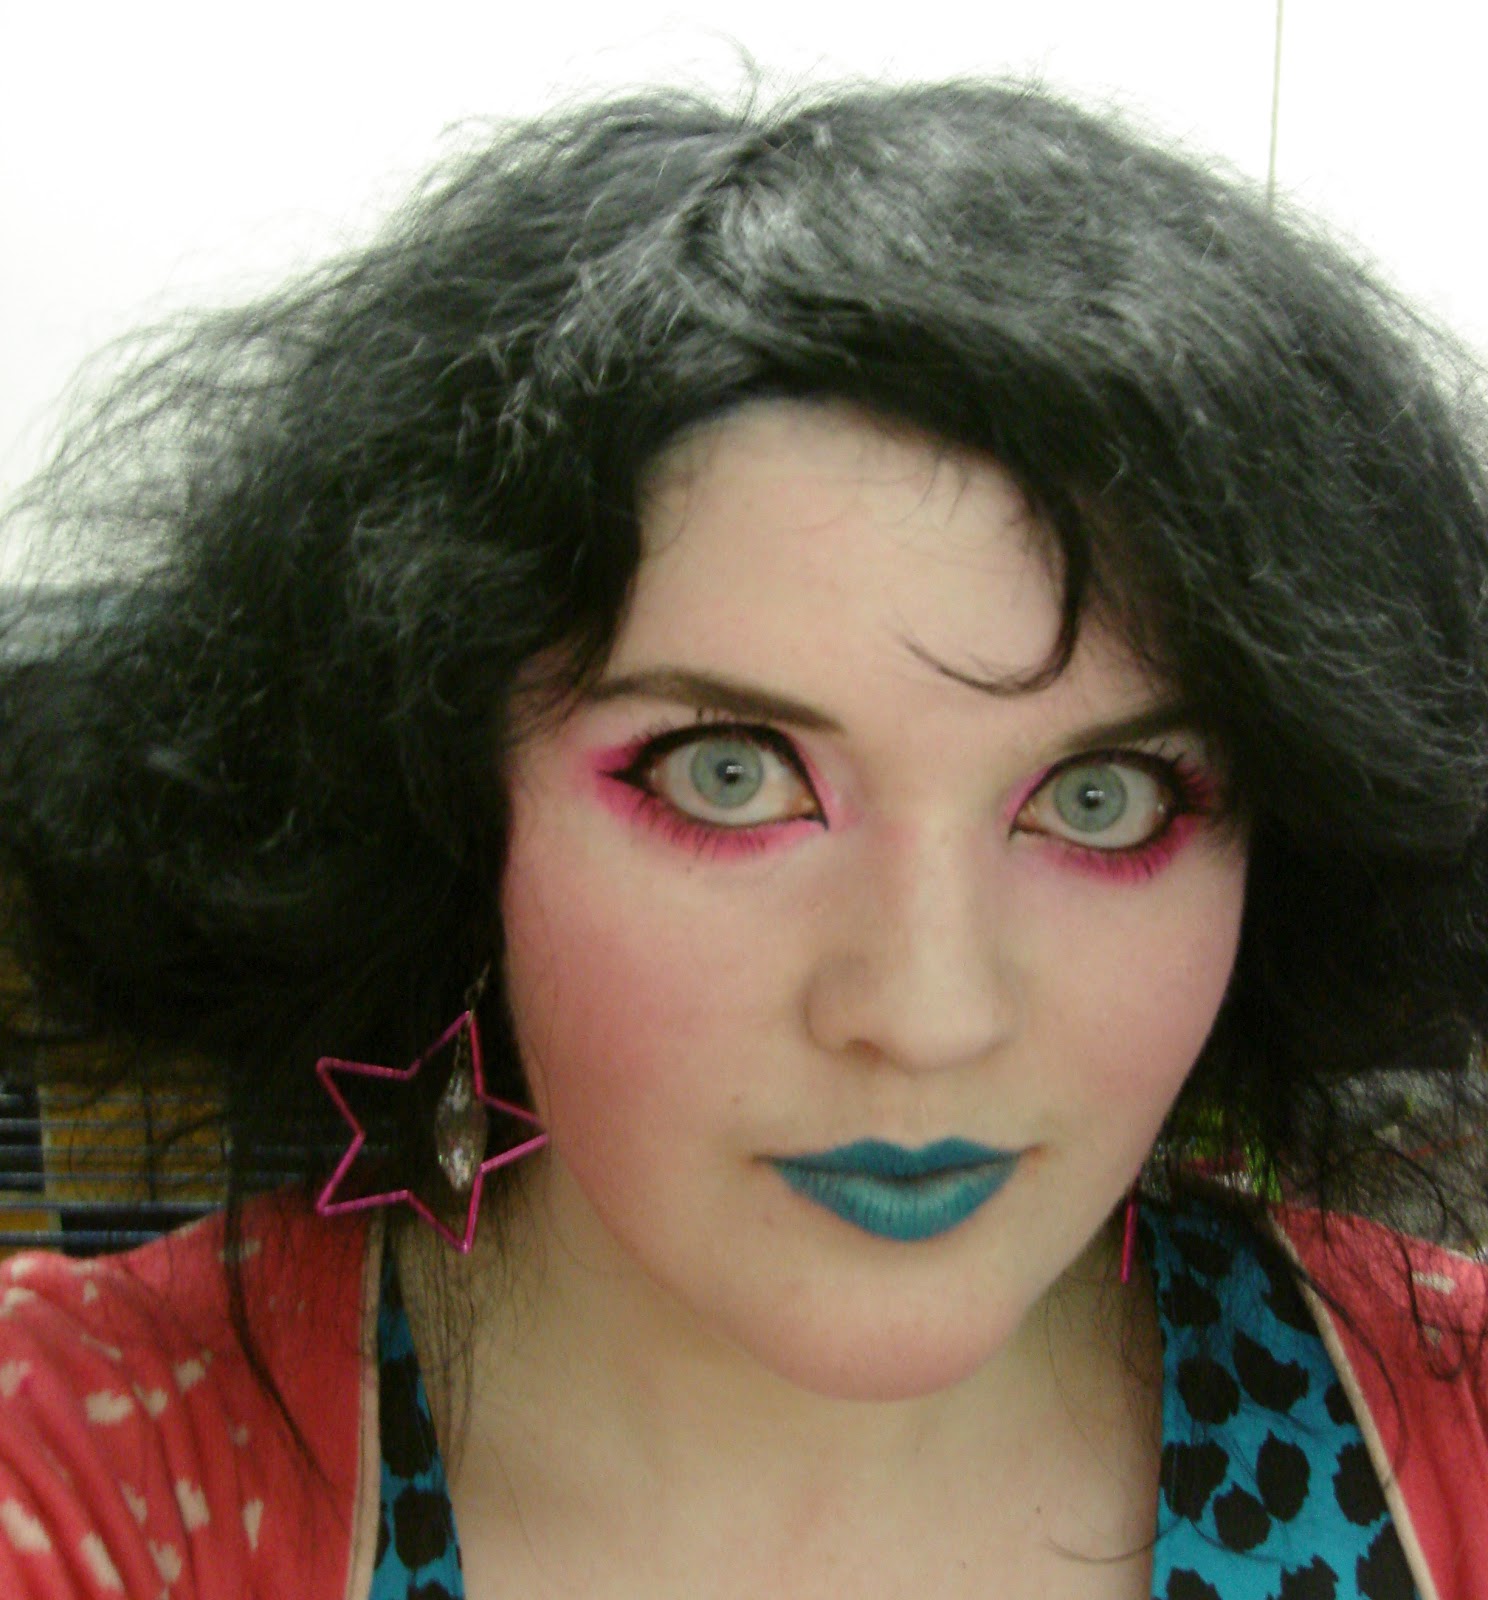 Funny Face's place: Candy Goth(ish) look